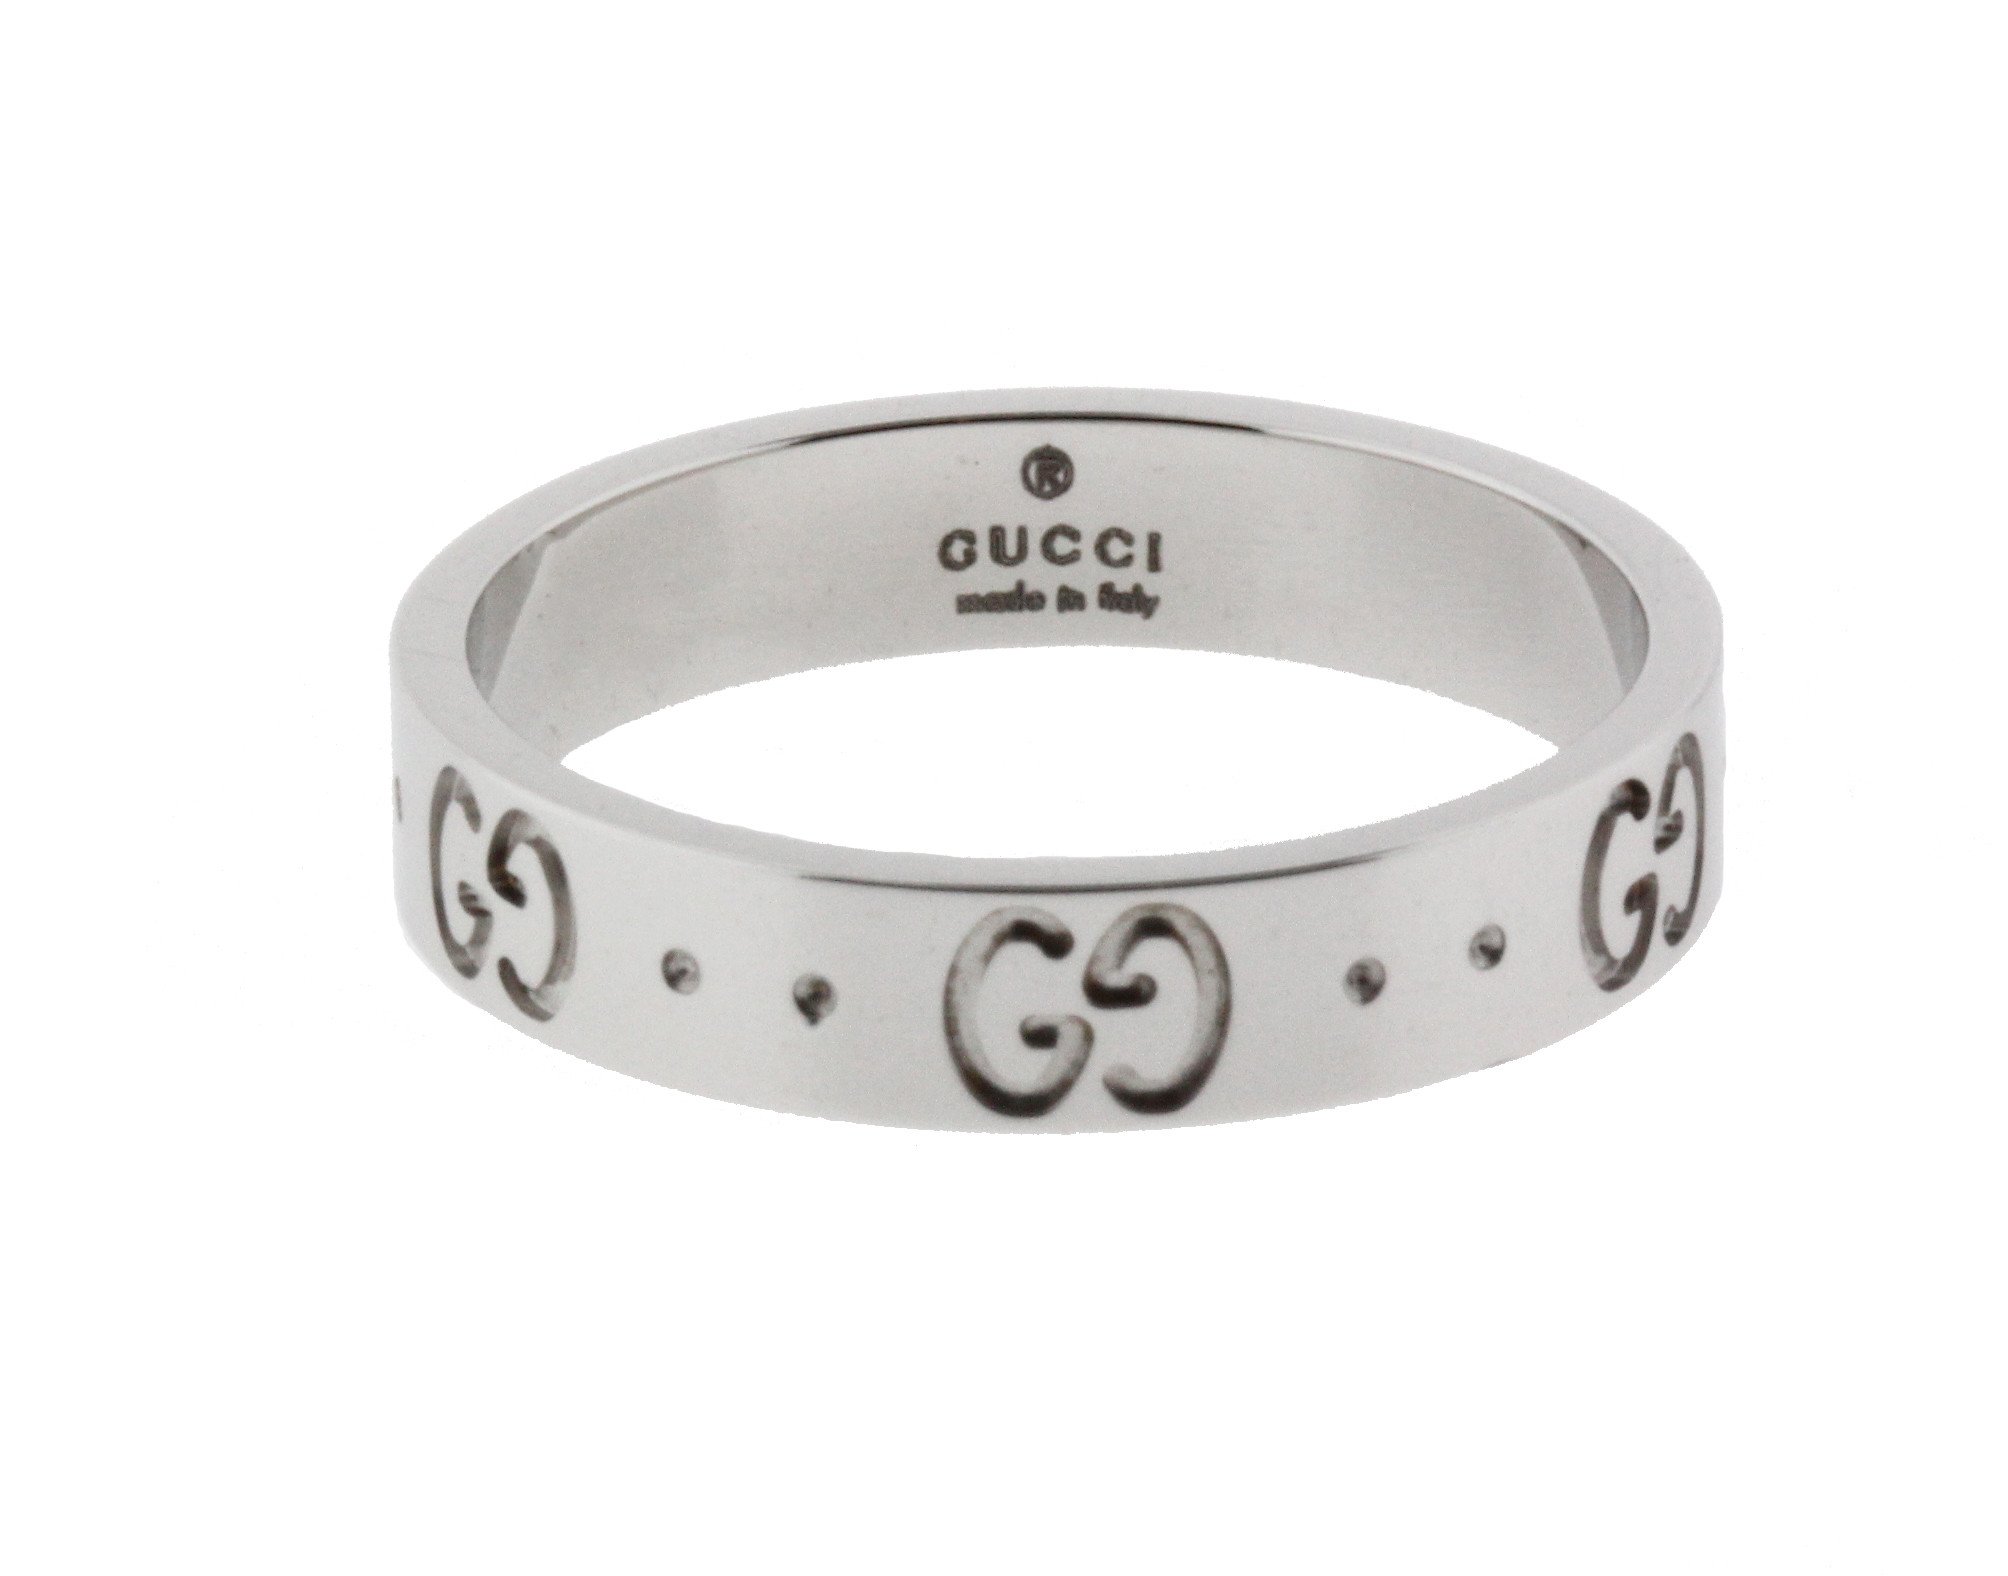 Gucci Icon Thin Band Ring In 18 Karat White Gold Size 5 - Jewelry by David